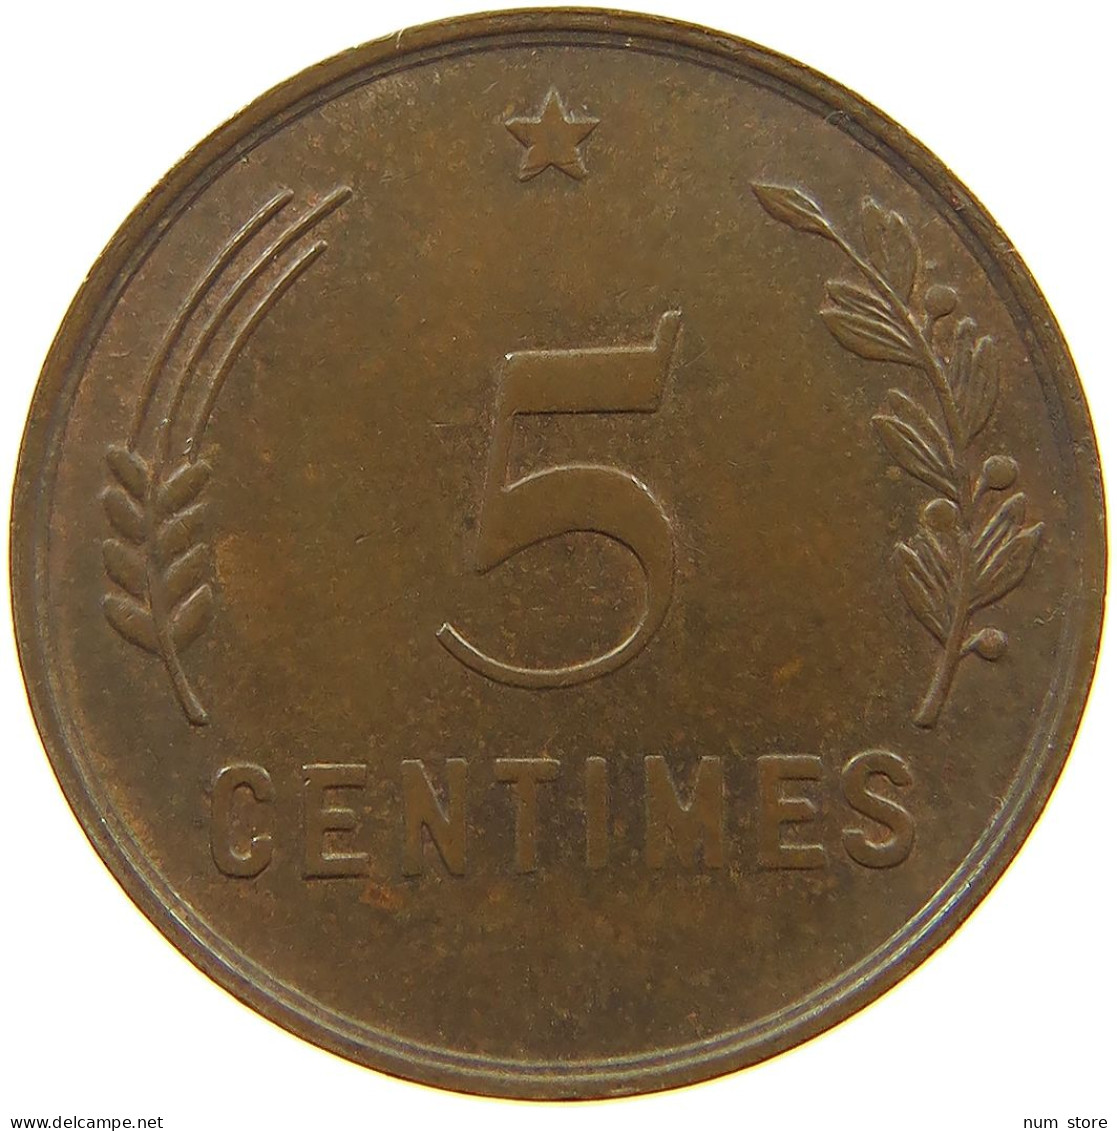 LUXEMBOURG 5 CENTIMES 1930 Charlotte (1919-1964) #a085 0741 - Luxembourg